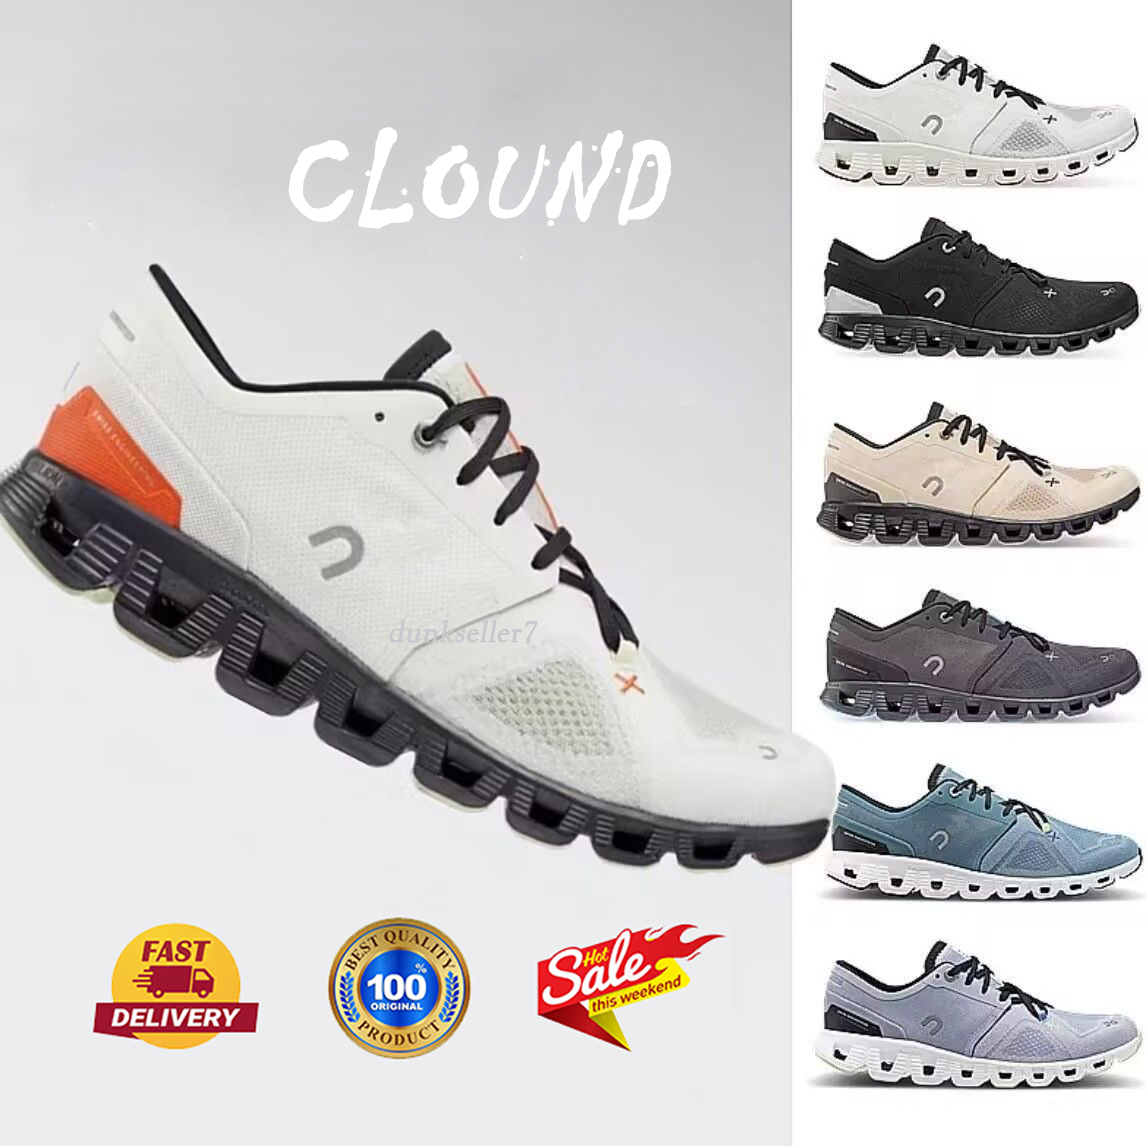 Cloud Designer Shoes Cloud X 3 Men Women Comfortable Running Breathable Ultralight Antiskid Outdoor Casual Fashion Sneakers